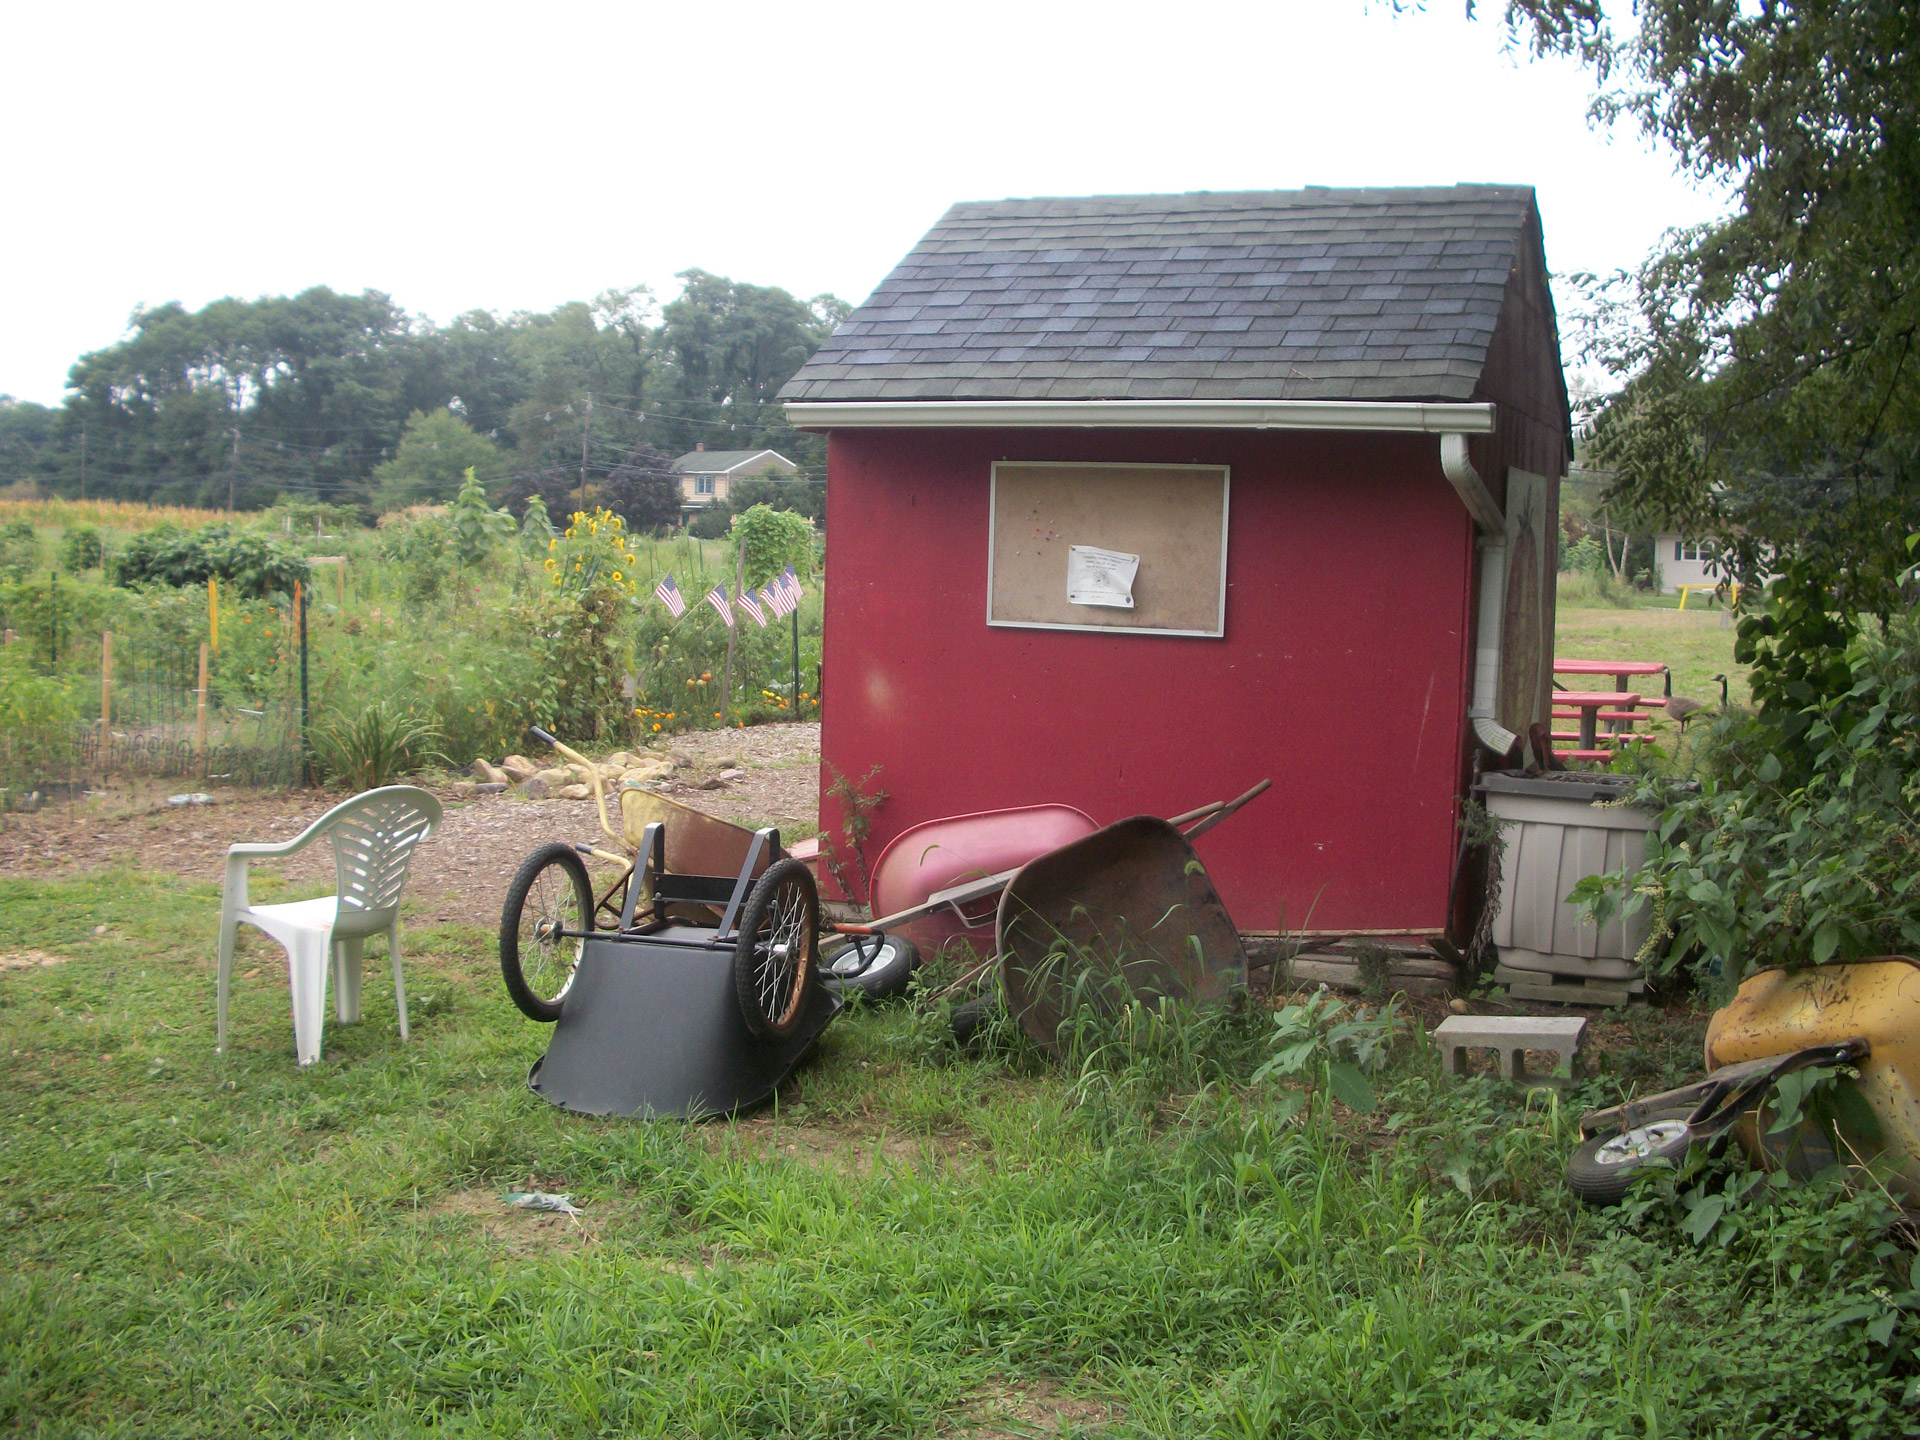 tool shed garden summer free photo